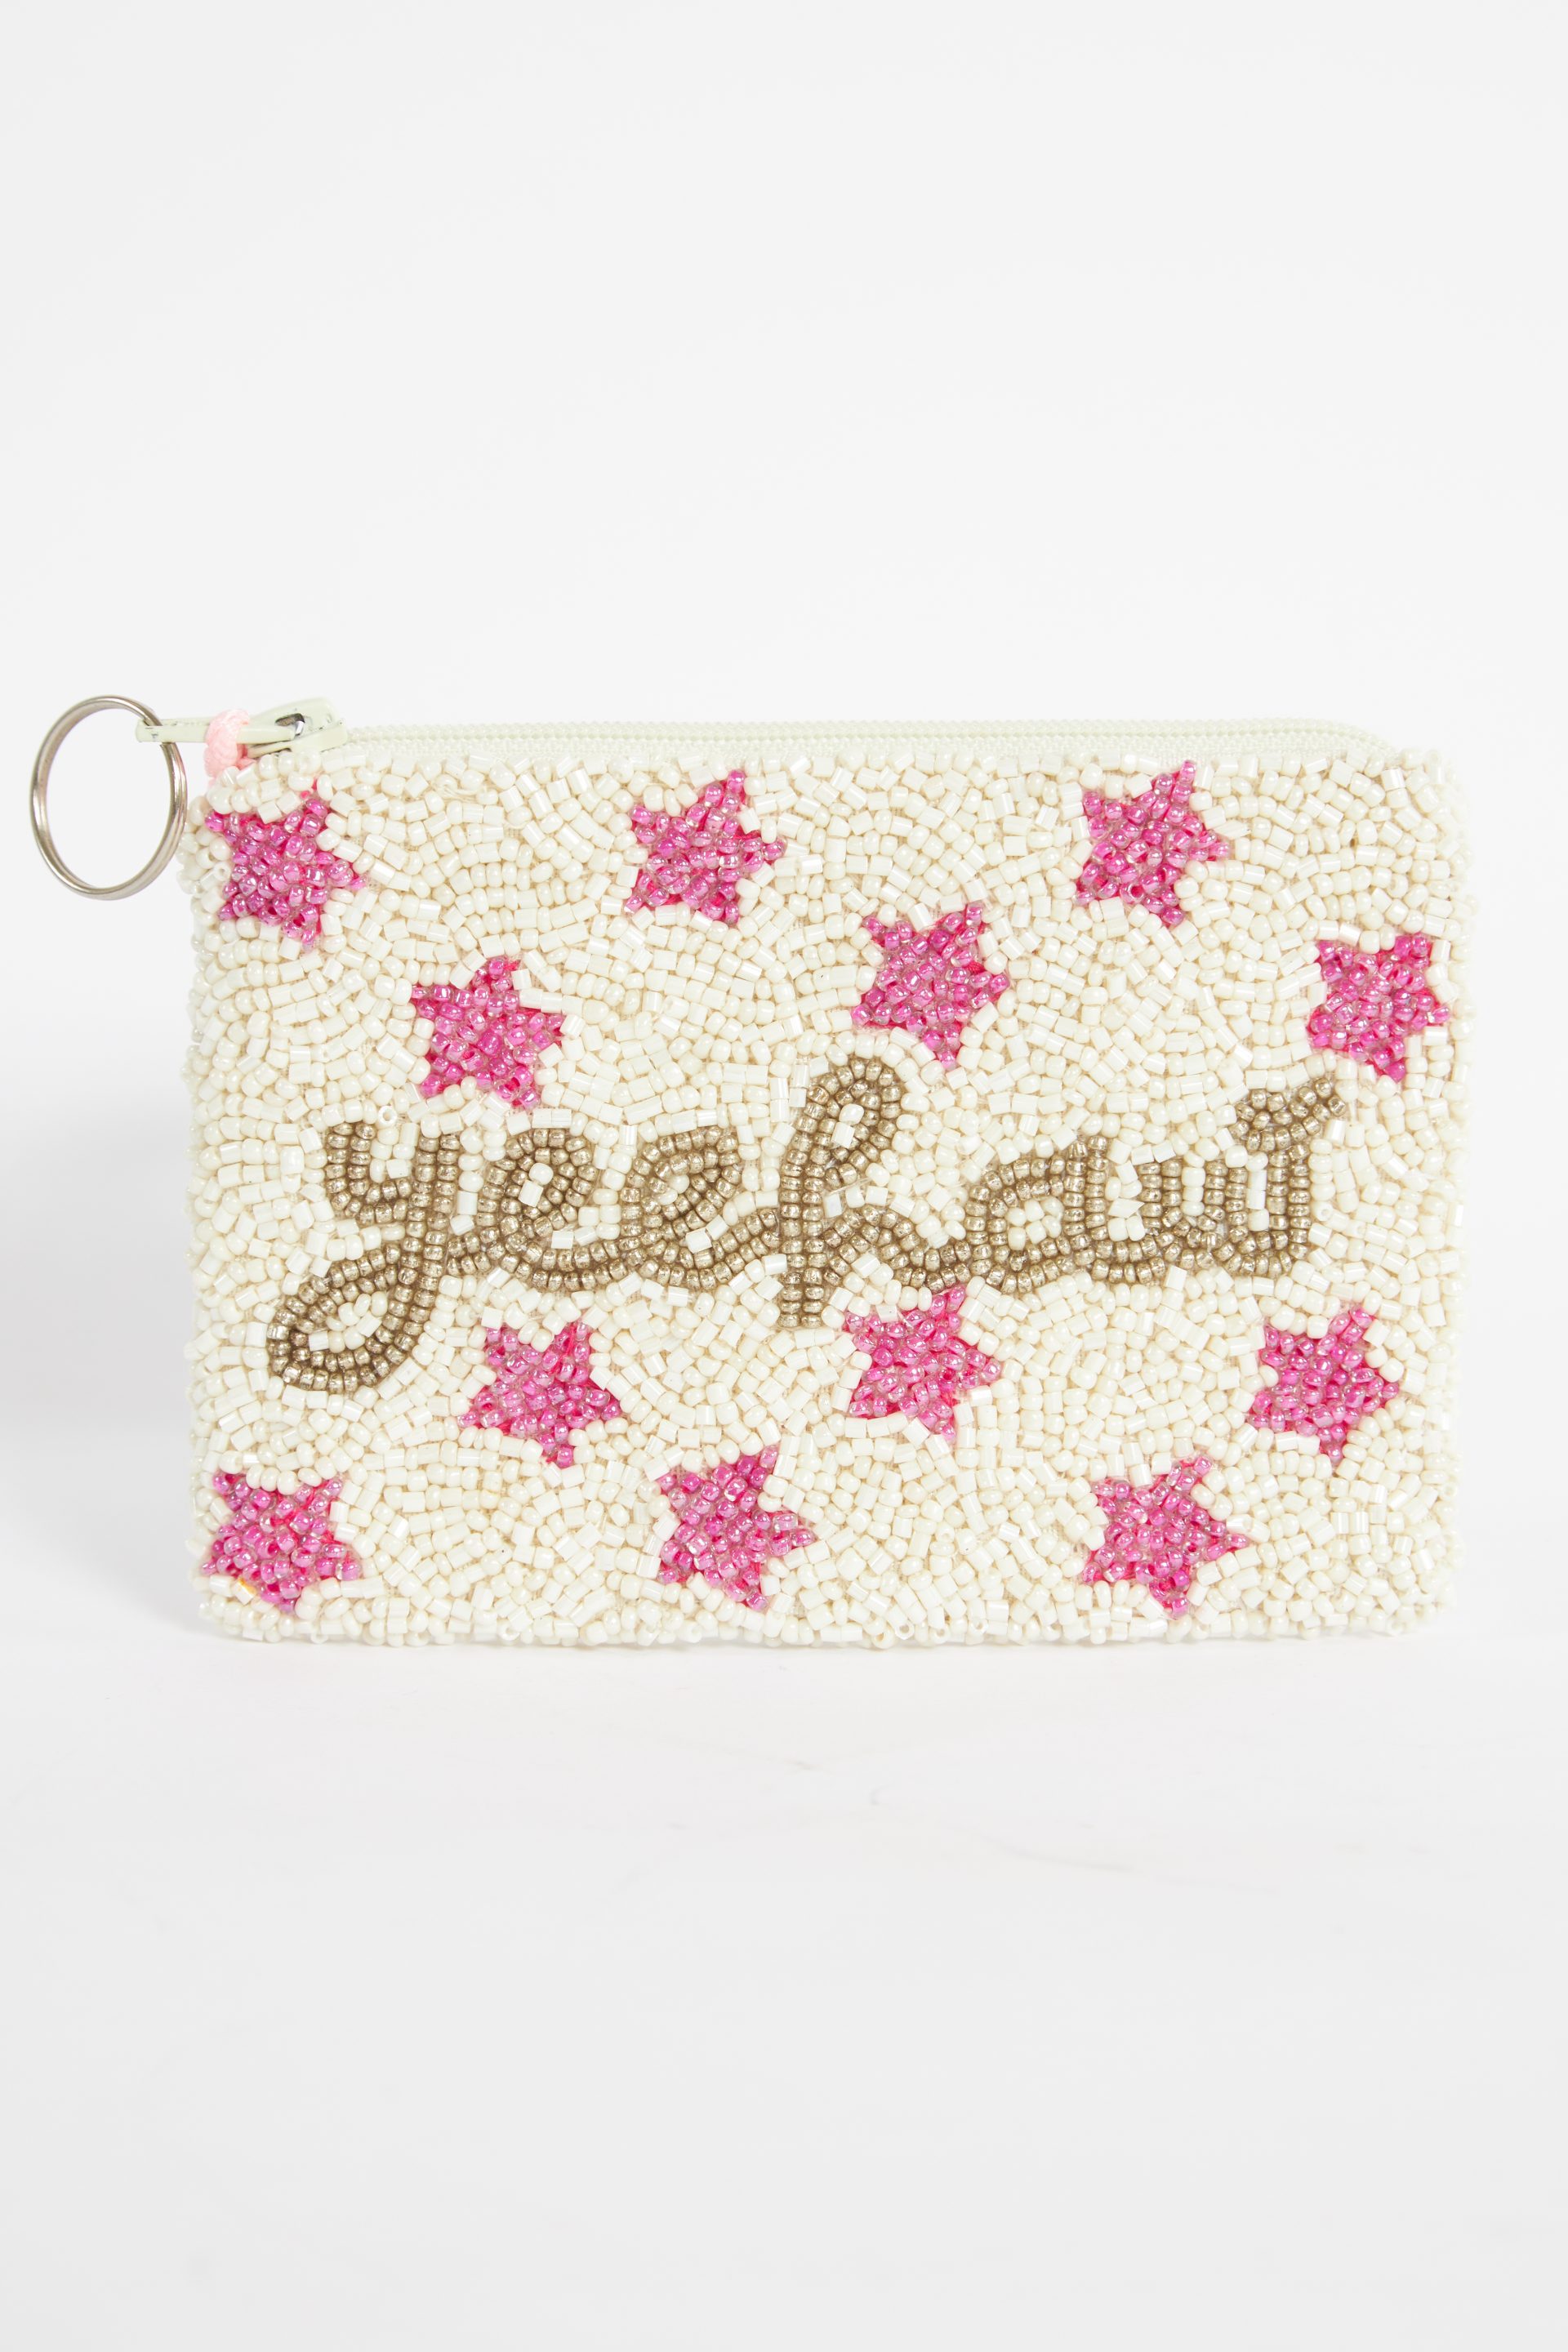 Yeehaw with Stars Coin Purse